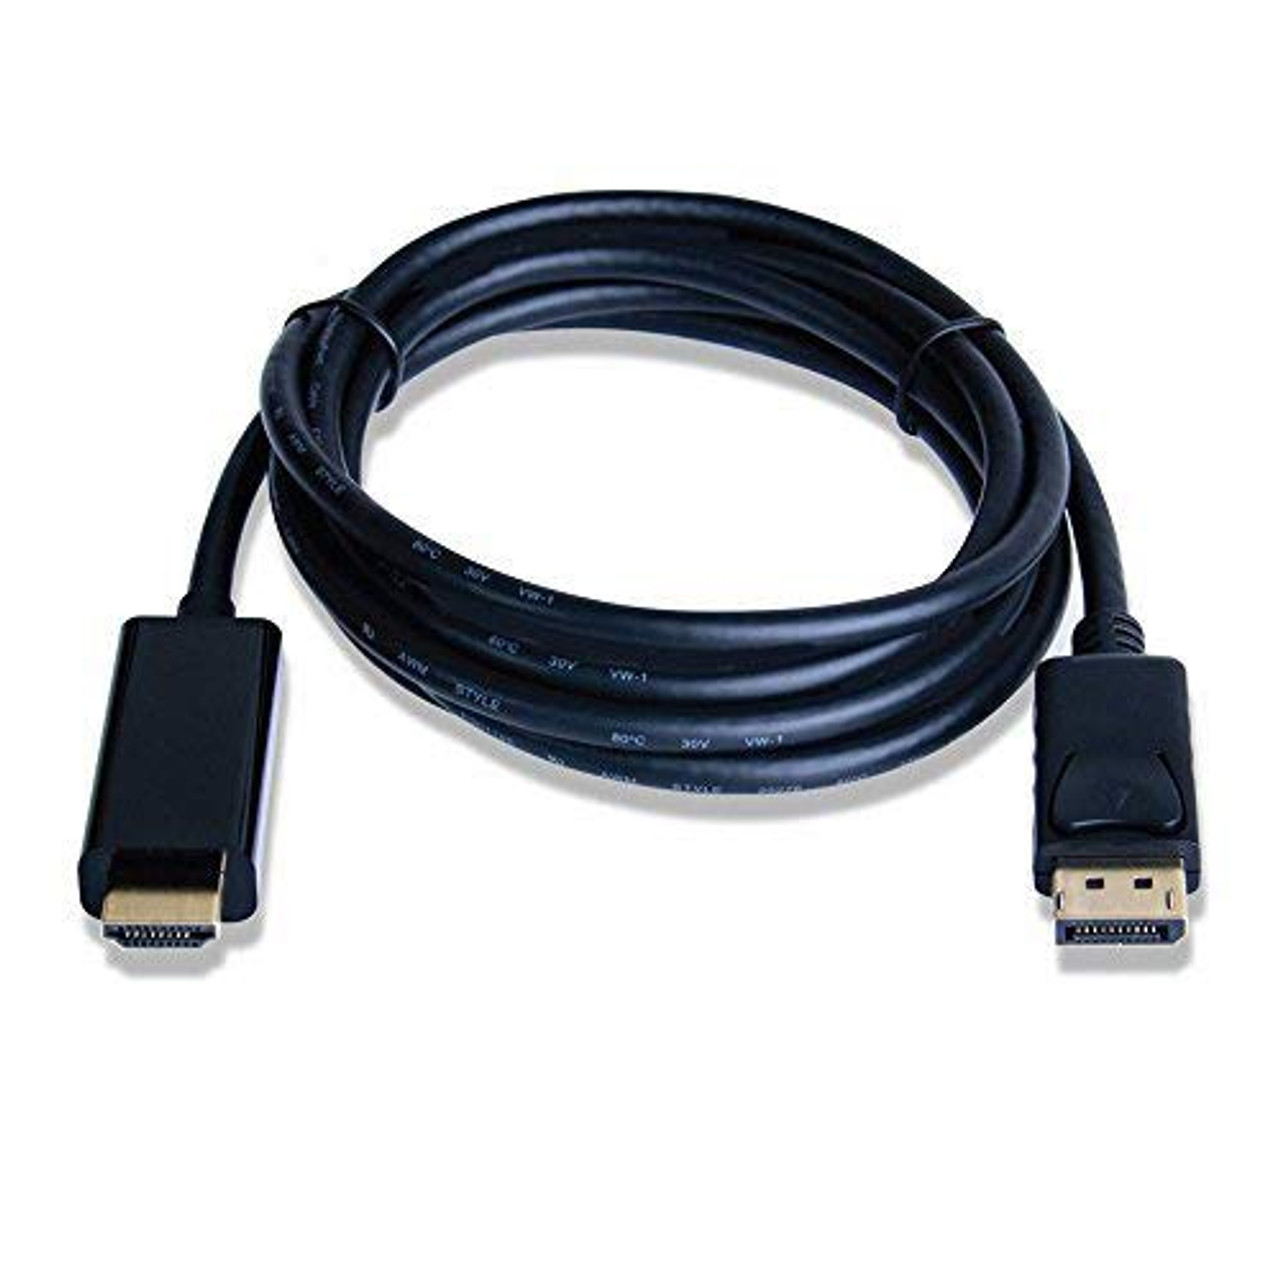 DisplayPort 1.4 to HDMI 2.0b Active Cable 6FT with HDR